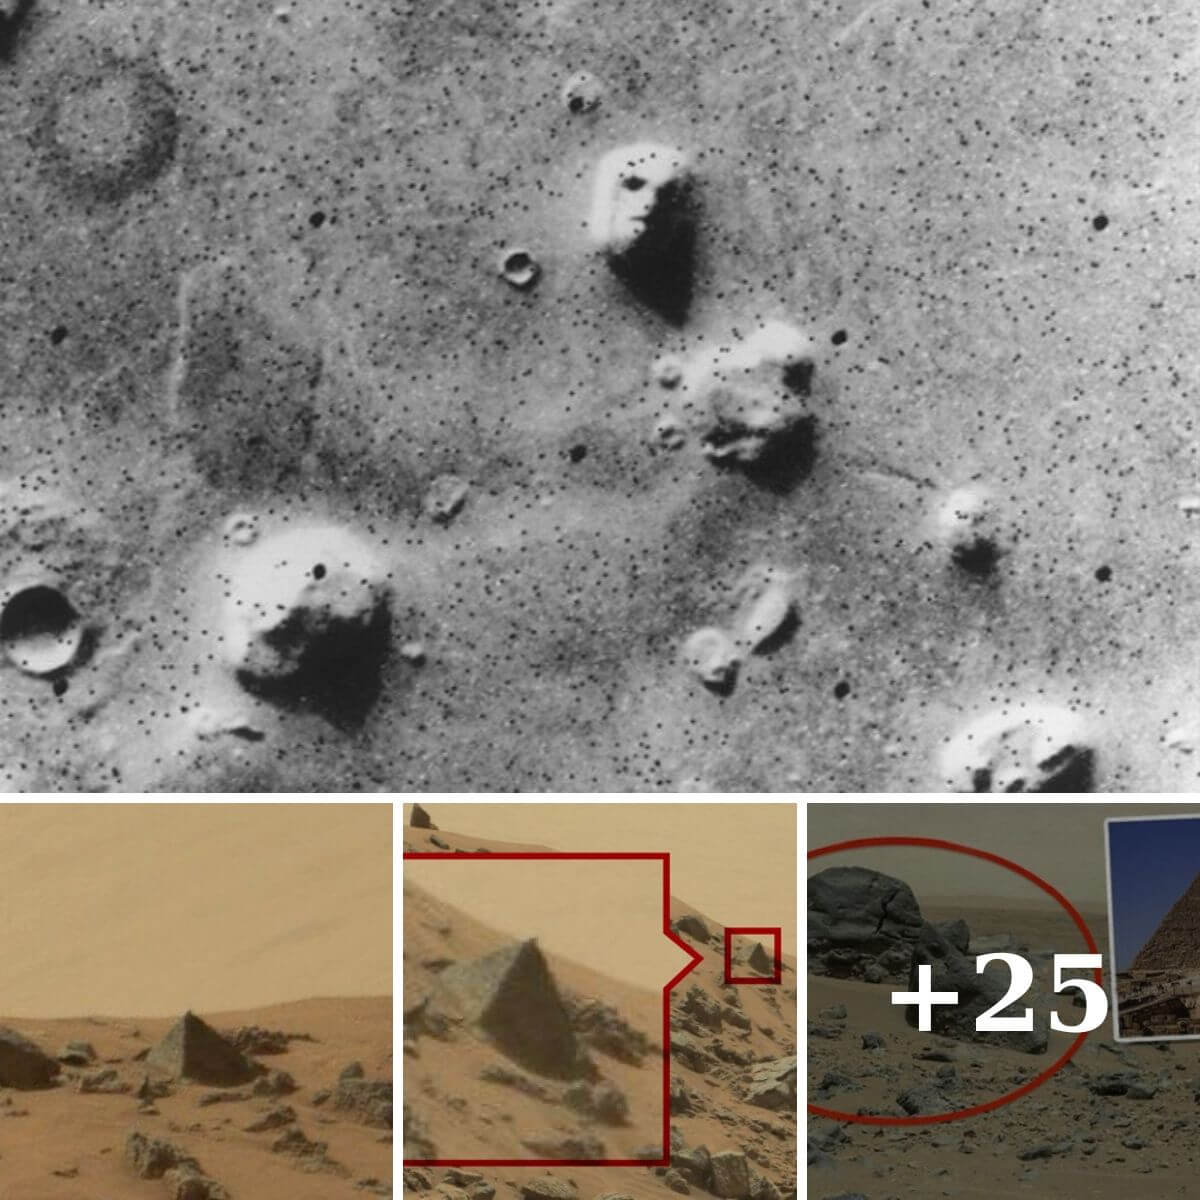 Martian Mysteries: The Discovery of Two 'Alien Pyramids' on Mars